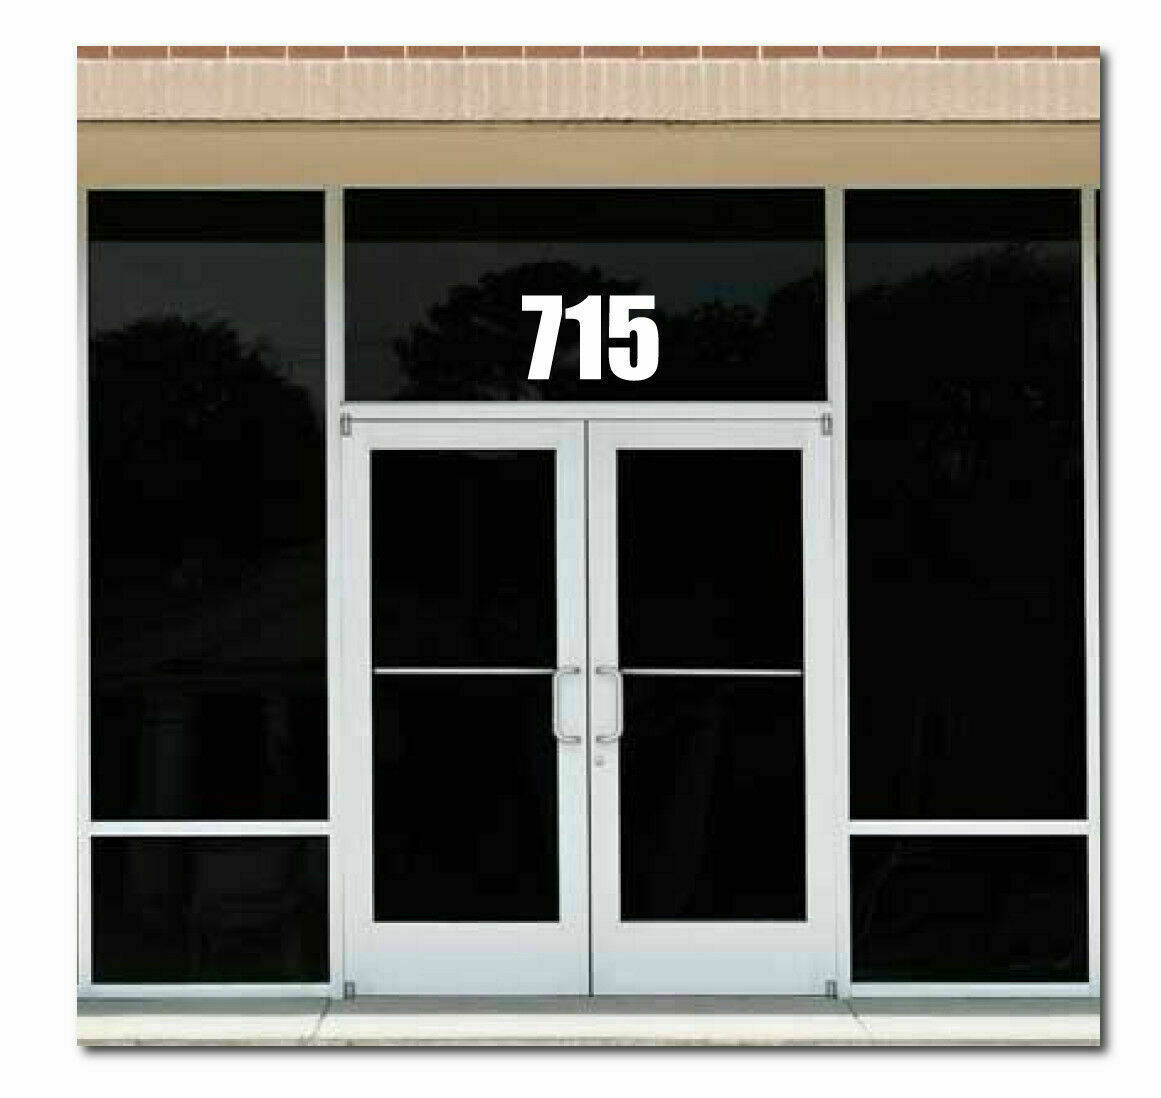 Customized Business Front Door Address Street Number - pick color - pick numbers